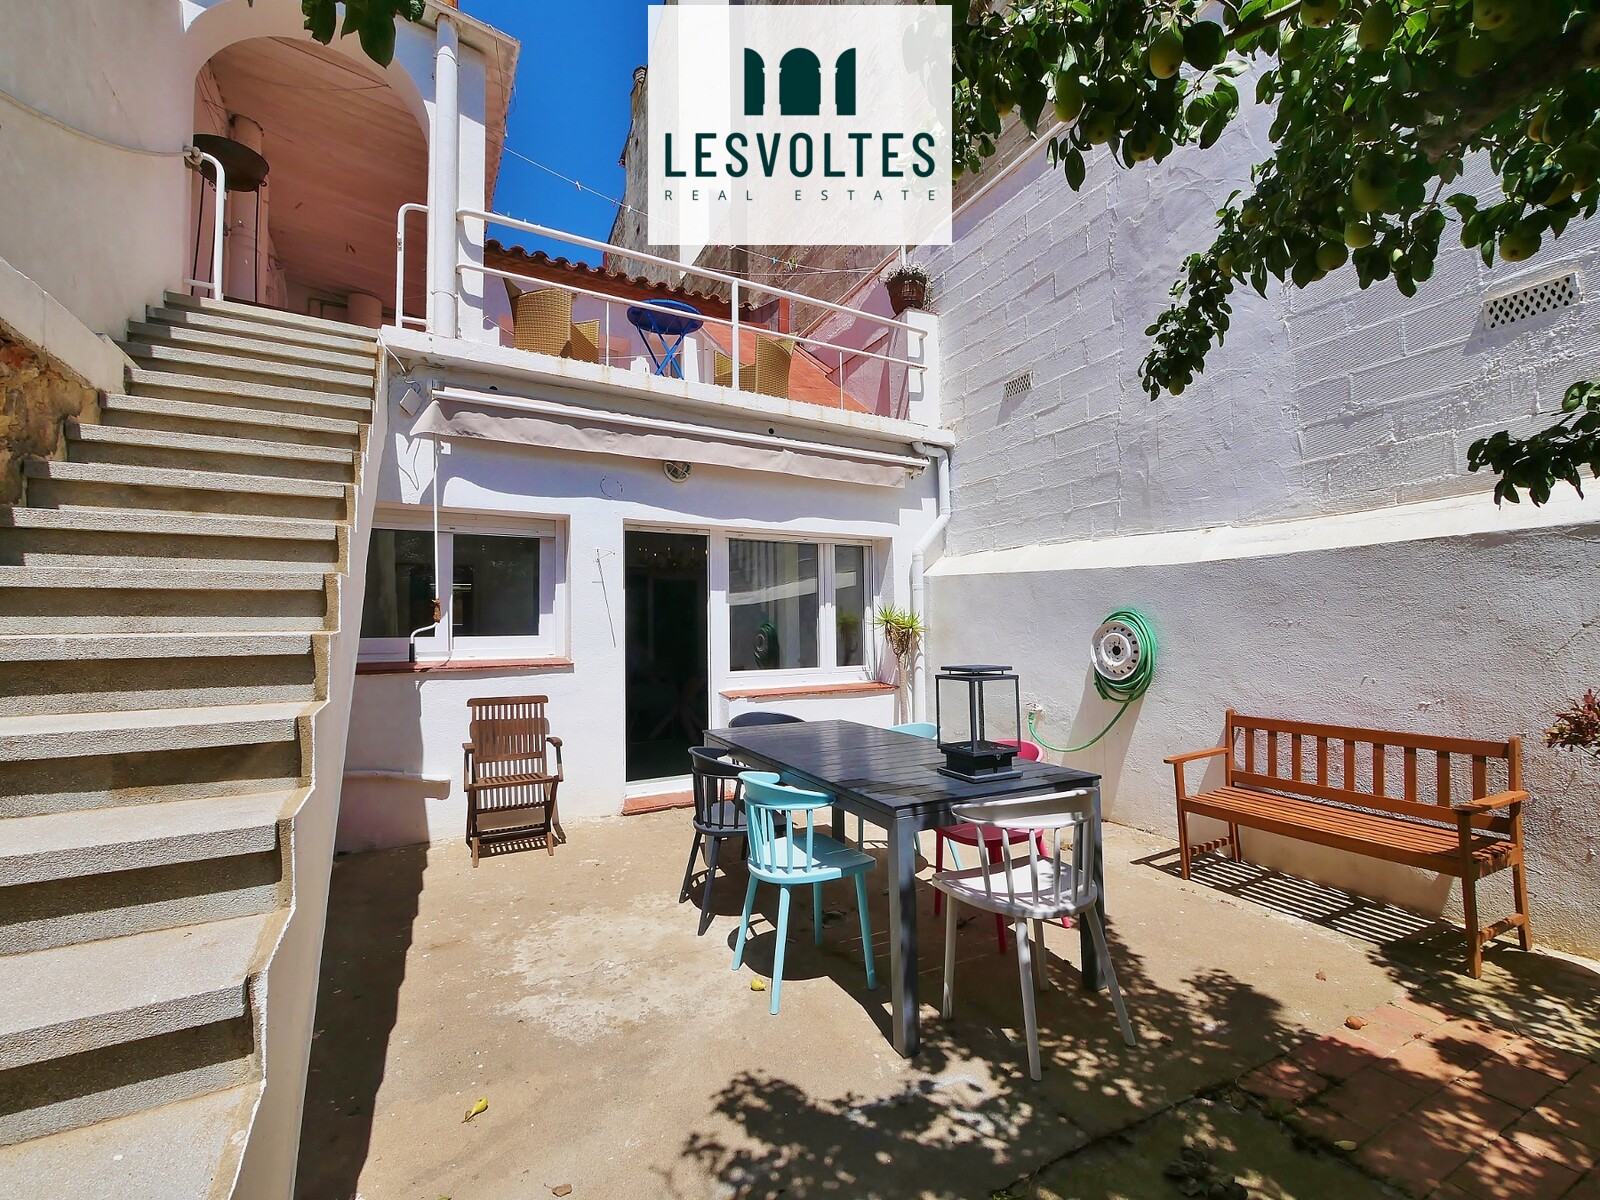 CHARMING VILLAGE HOUSE WITH GARDEN, TERRACE AND GARAGE FOR SALE IN PALAFRUGELL. INTERESTING PROPERTY